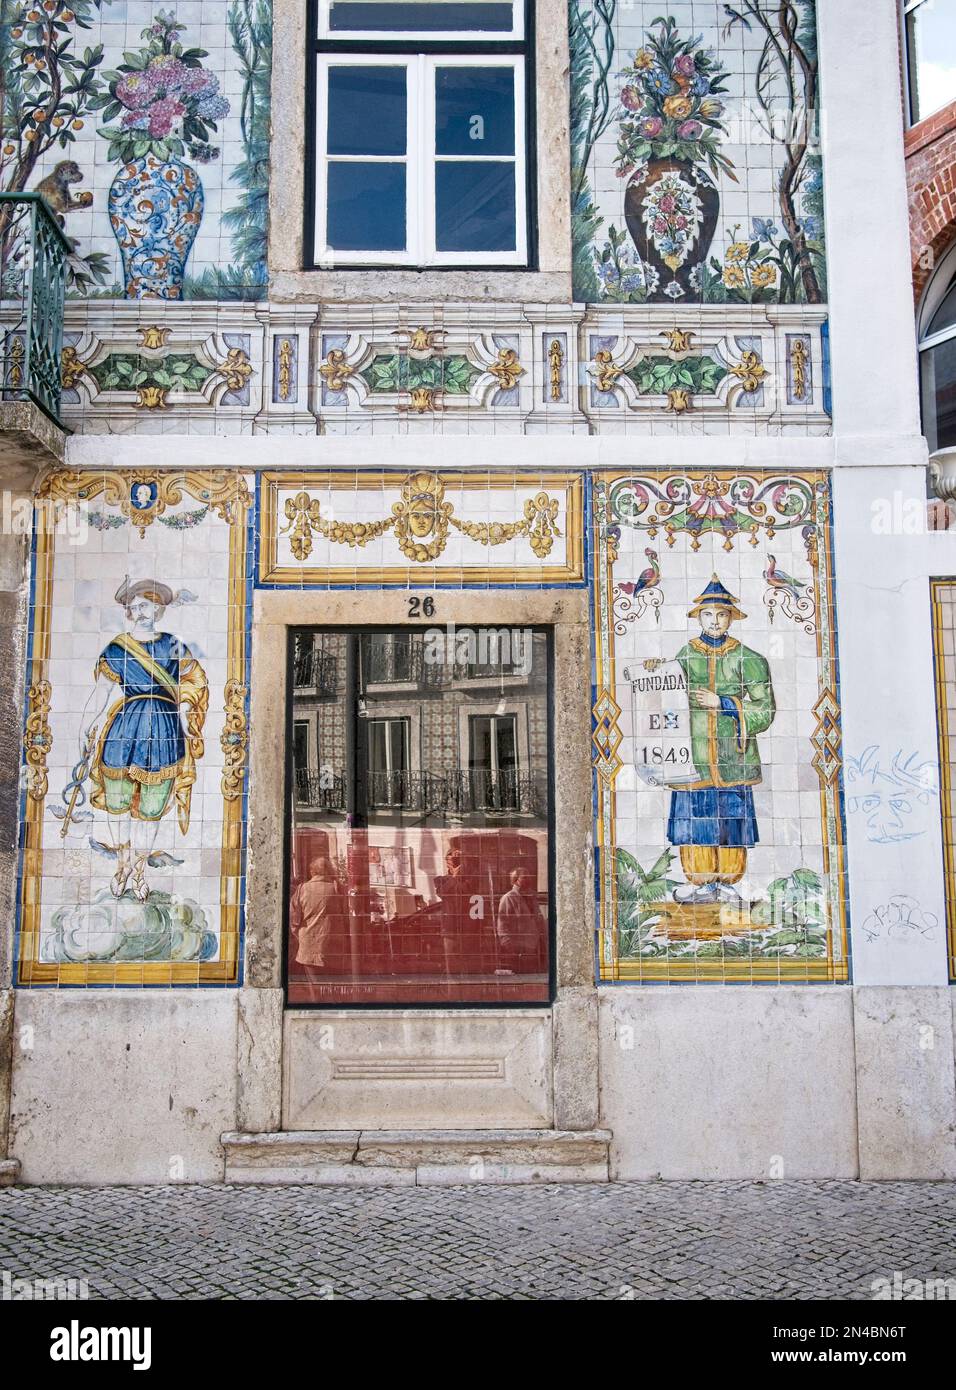 Vertical Elaborate colored tiled artwork on building wall with figures, flowers and vases, and ornate decorations, in Lisbon, Portugal Stock Photo